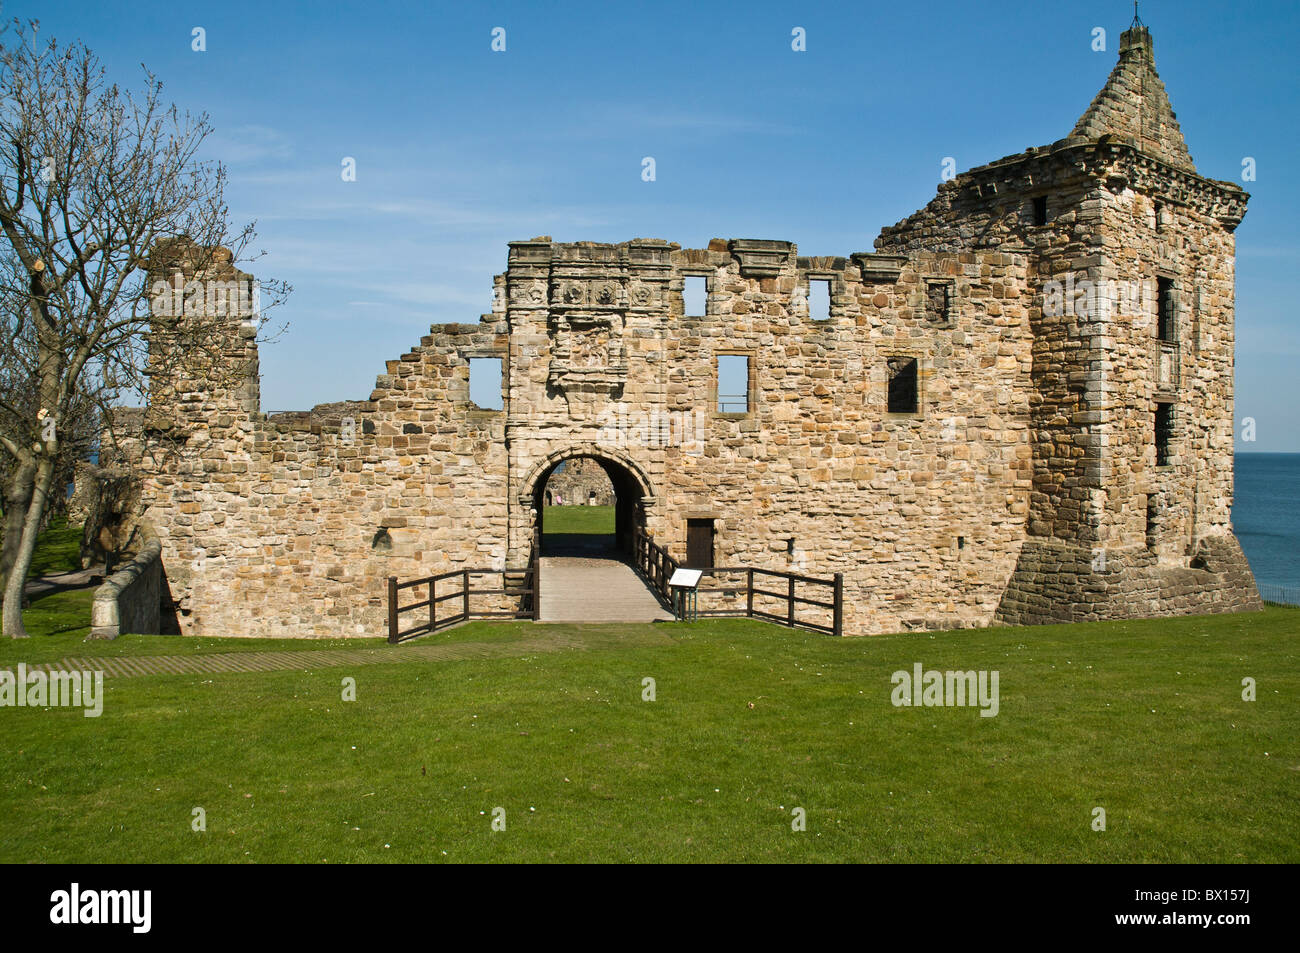 dh Former Bishops Palace ST ANDREWS FIFE Scottish castles entrance ruins heritage attraction scotland castle Stock Photo